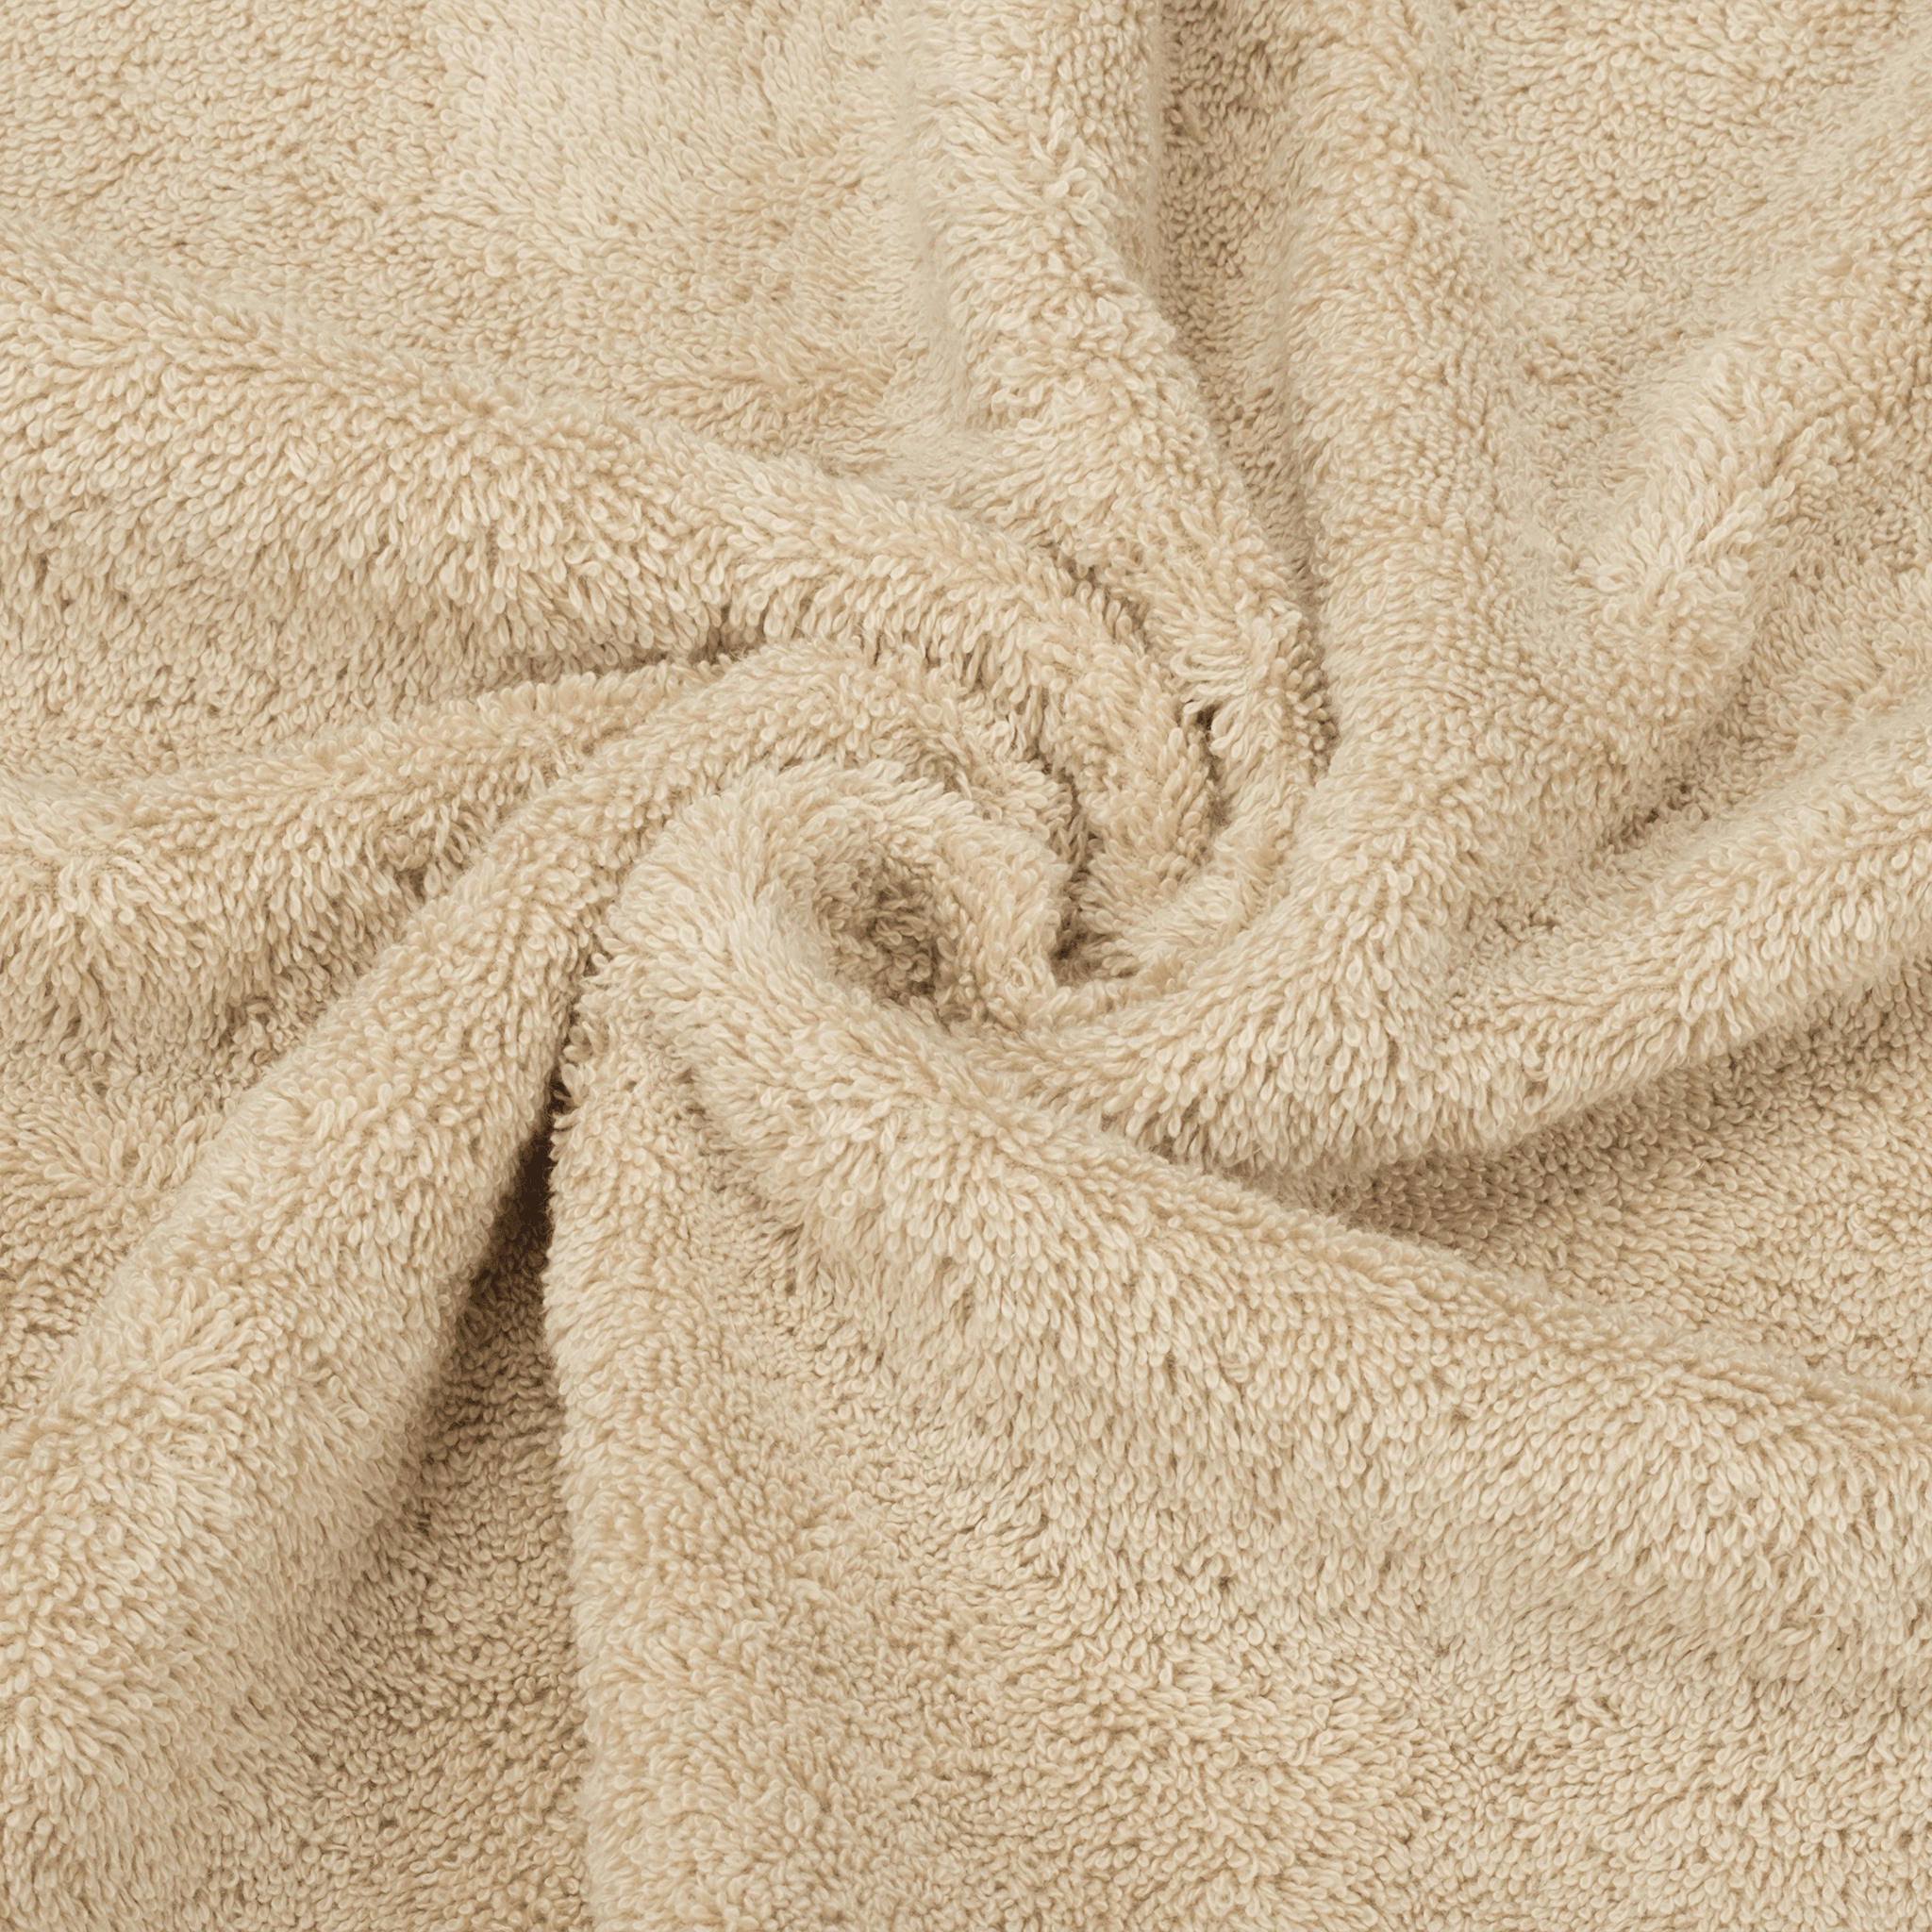 American Soft Linen - Single Piece Turkish Cotton Washcloth Towels - Sand-Taupe - 5